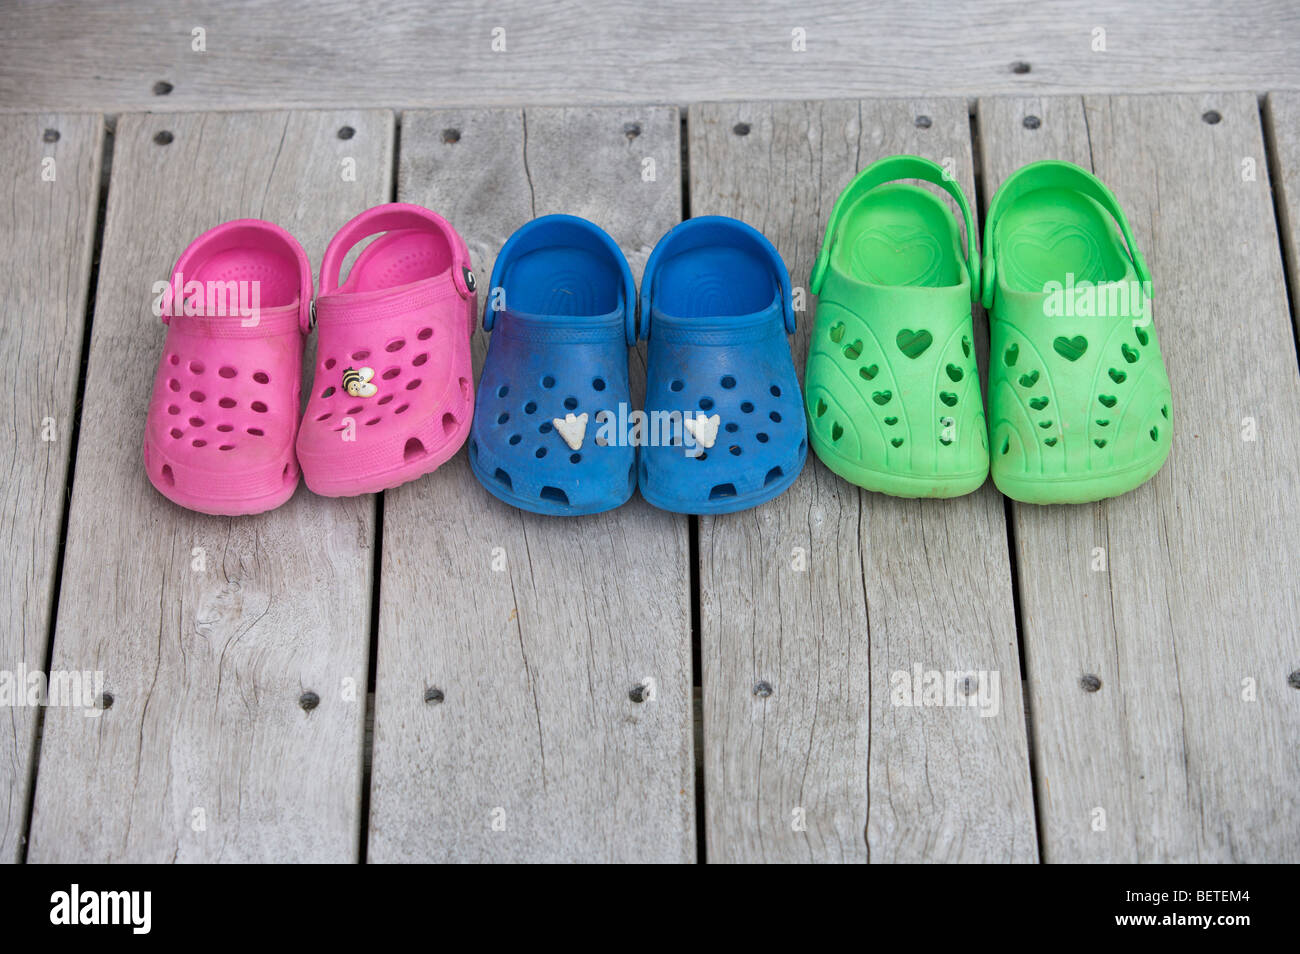 Childrens shoes on wooden decking Stock Photo